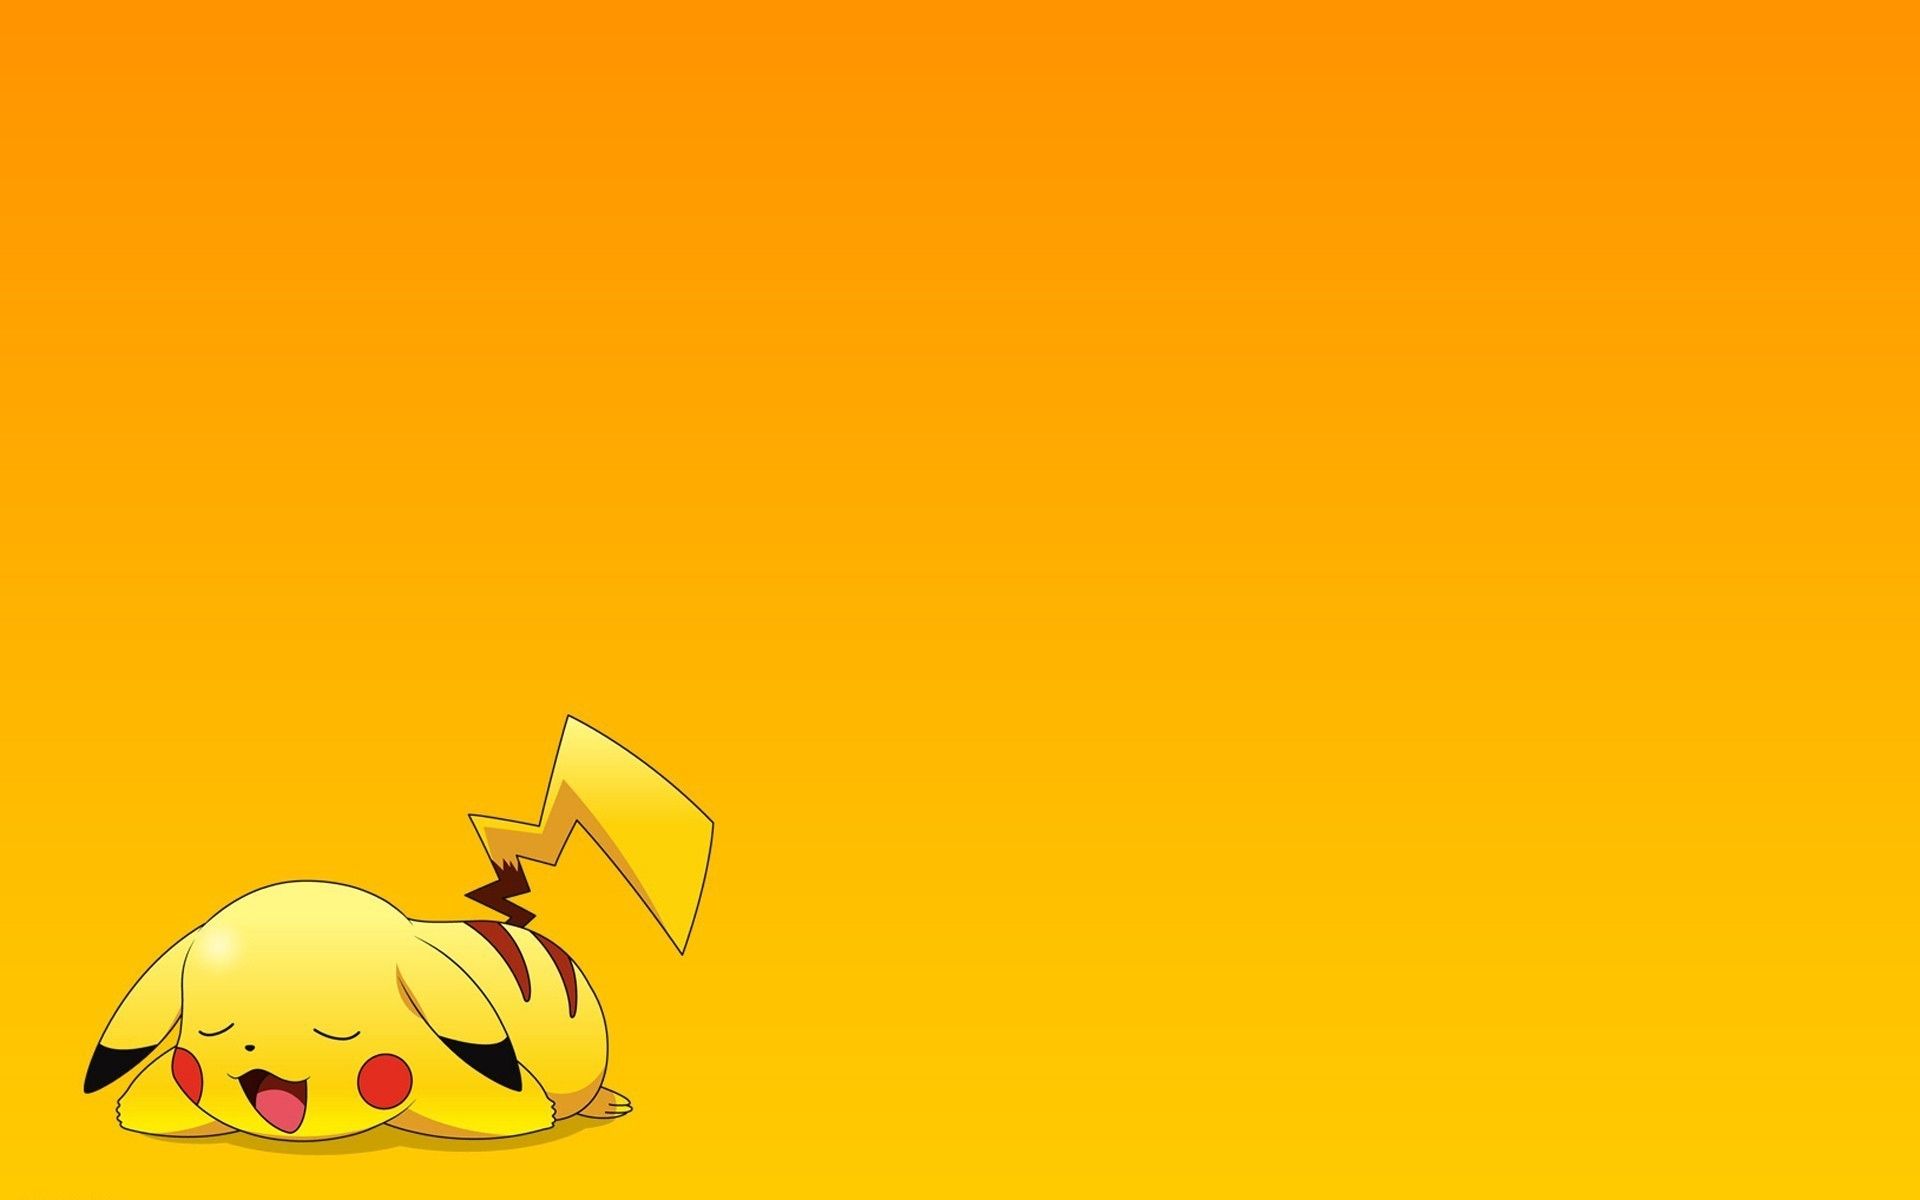 Pikachu 4K wallpaper for your desktop or mobile screen free and easy to download